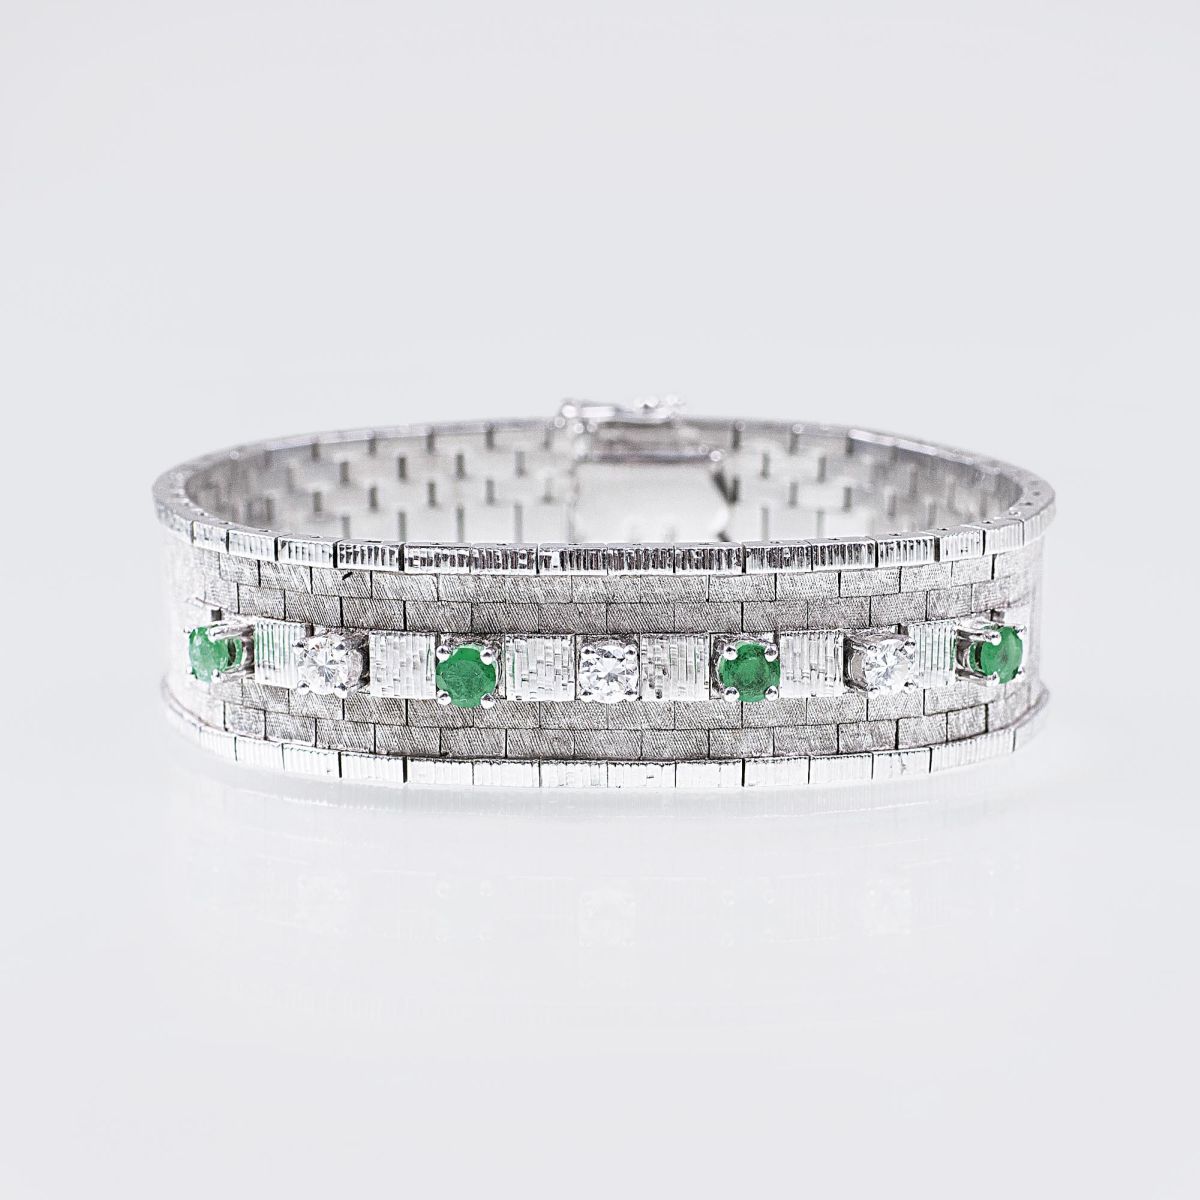 A Vintage Gold Bracelet with Diamonds and Emeralds